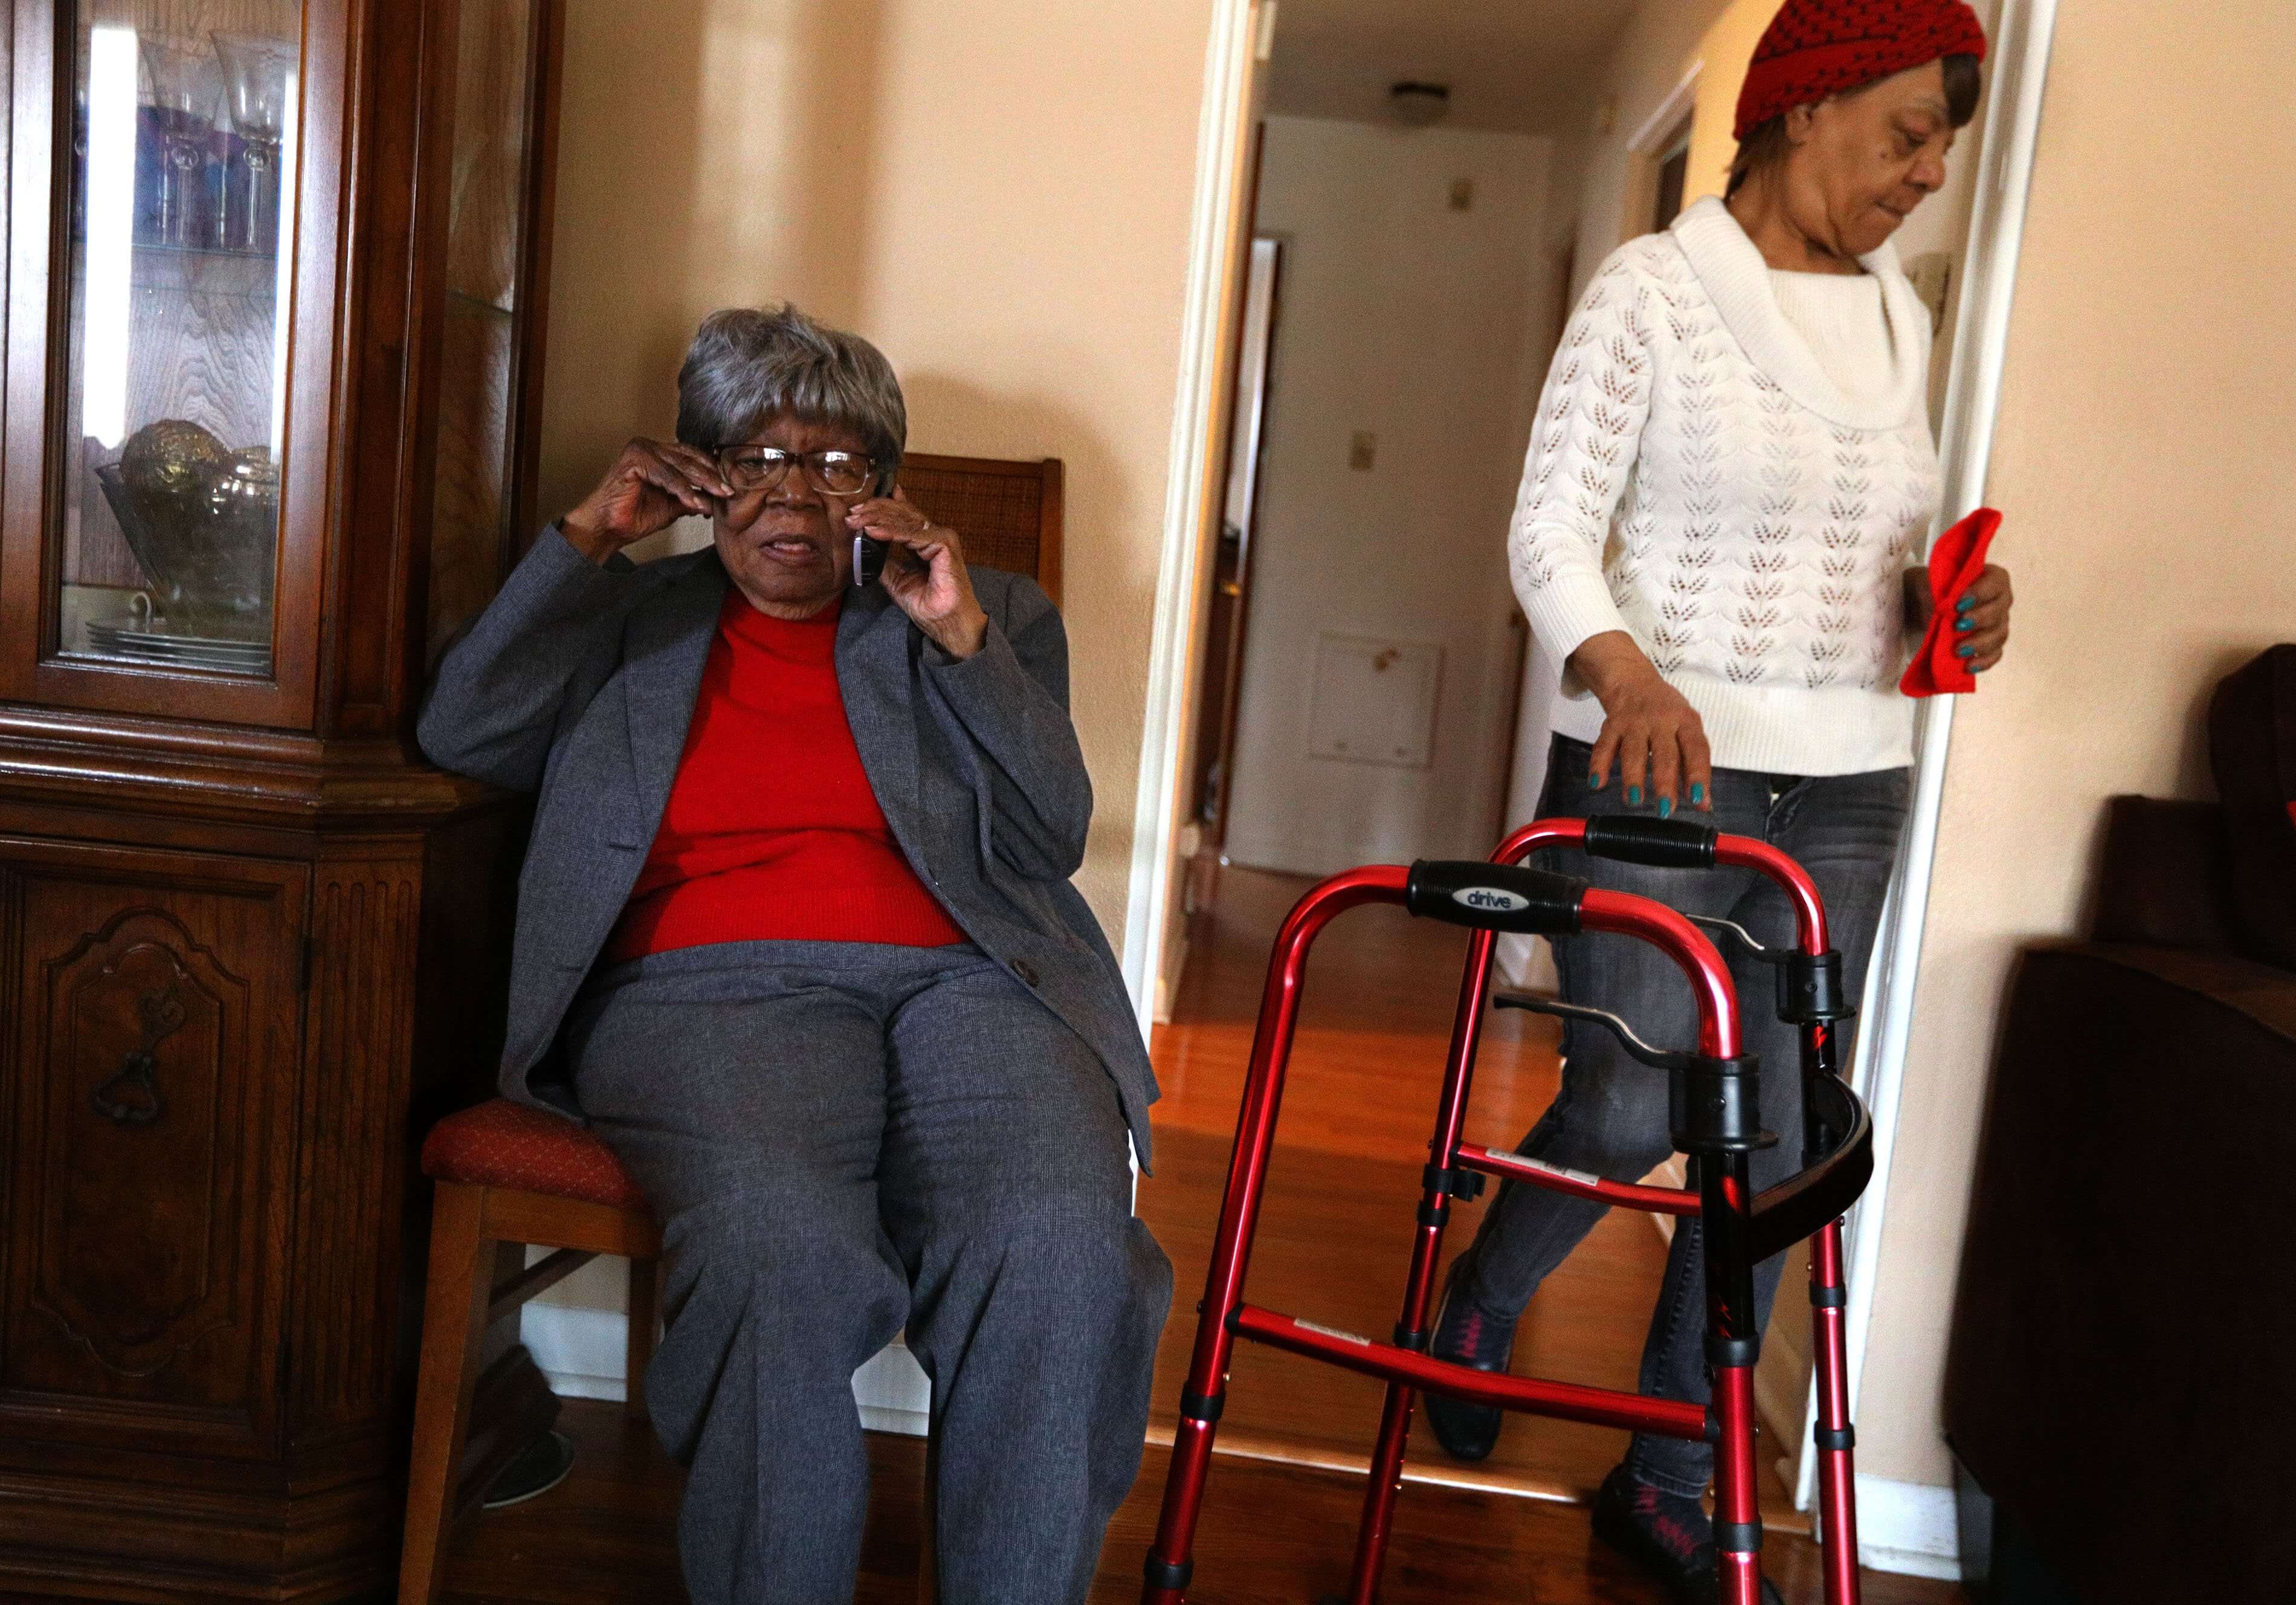 Barbara Lewis, (left), talks on the phone with her son on Wednesday, Dec. 19, 2018, as her daughter, Rosalyn Stiles, (right), dodges a walker in the doorway in their University City home. Lewis' memory problems began four years ago. She found the sermons at her church confusing, left ingredients out of her pies and cakes, and thought people were moving her things.